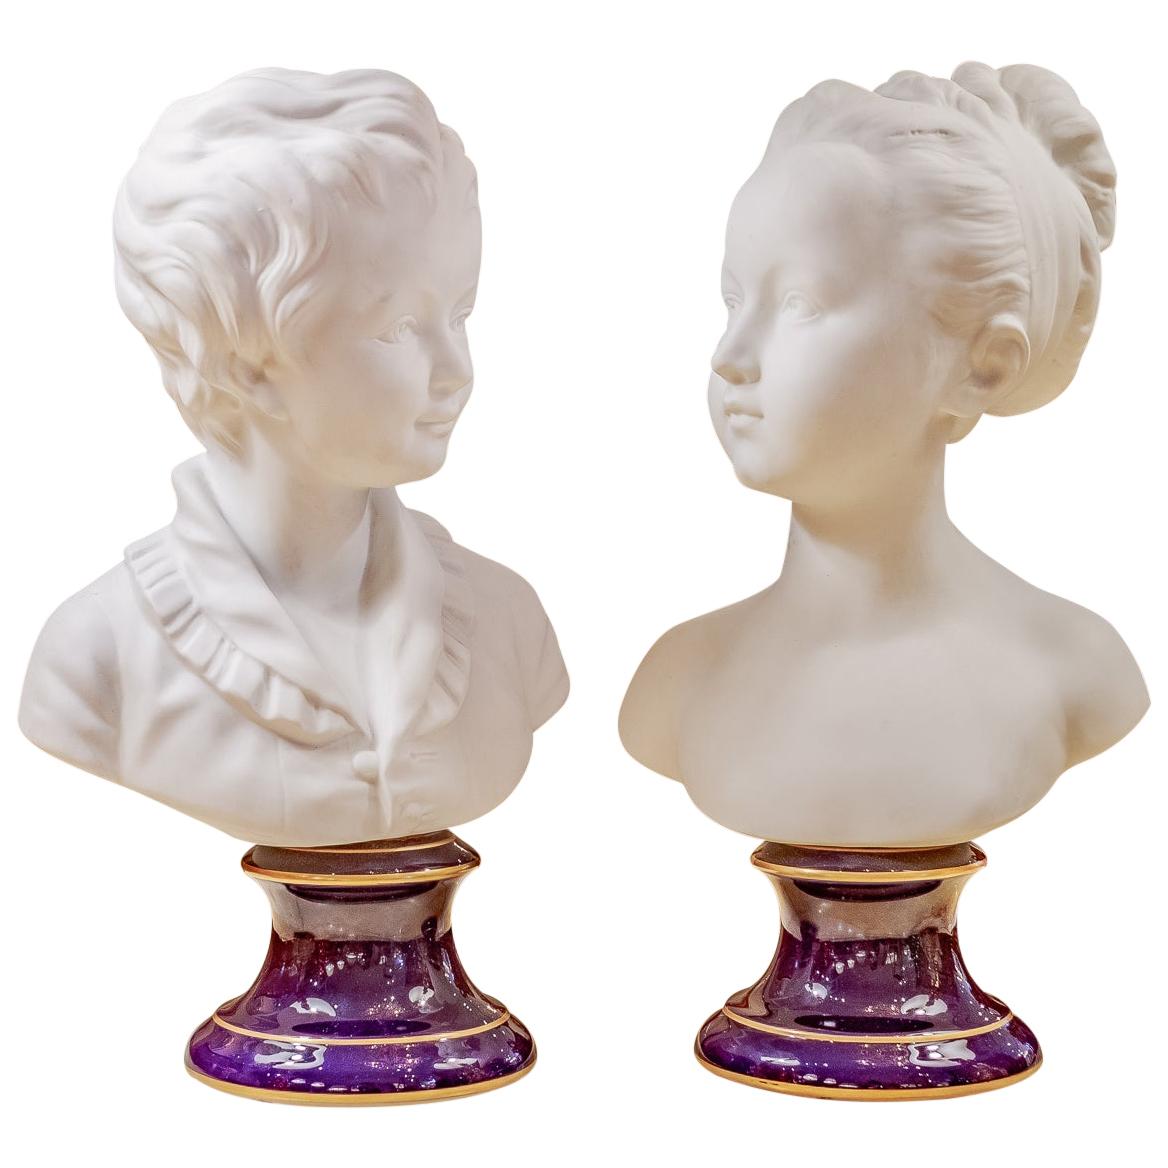 Beautiful Pair of Late 19th Century French Limoges Porcelain Busts on Sevres For Sale